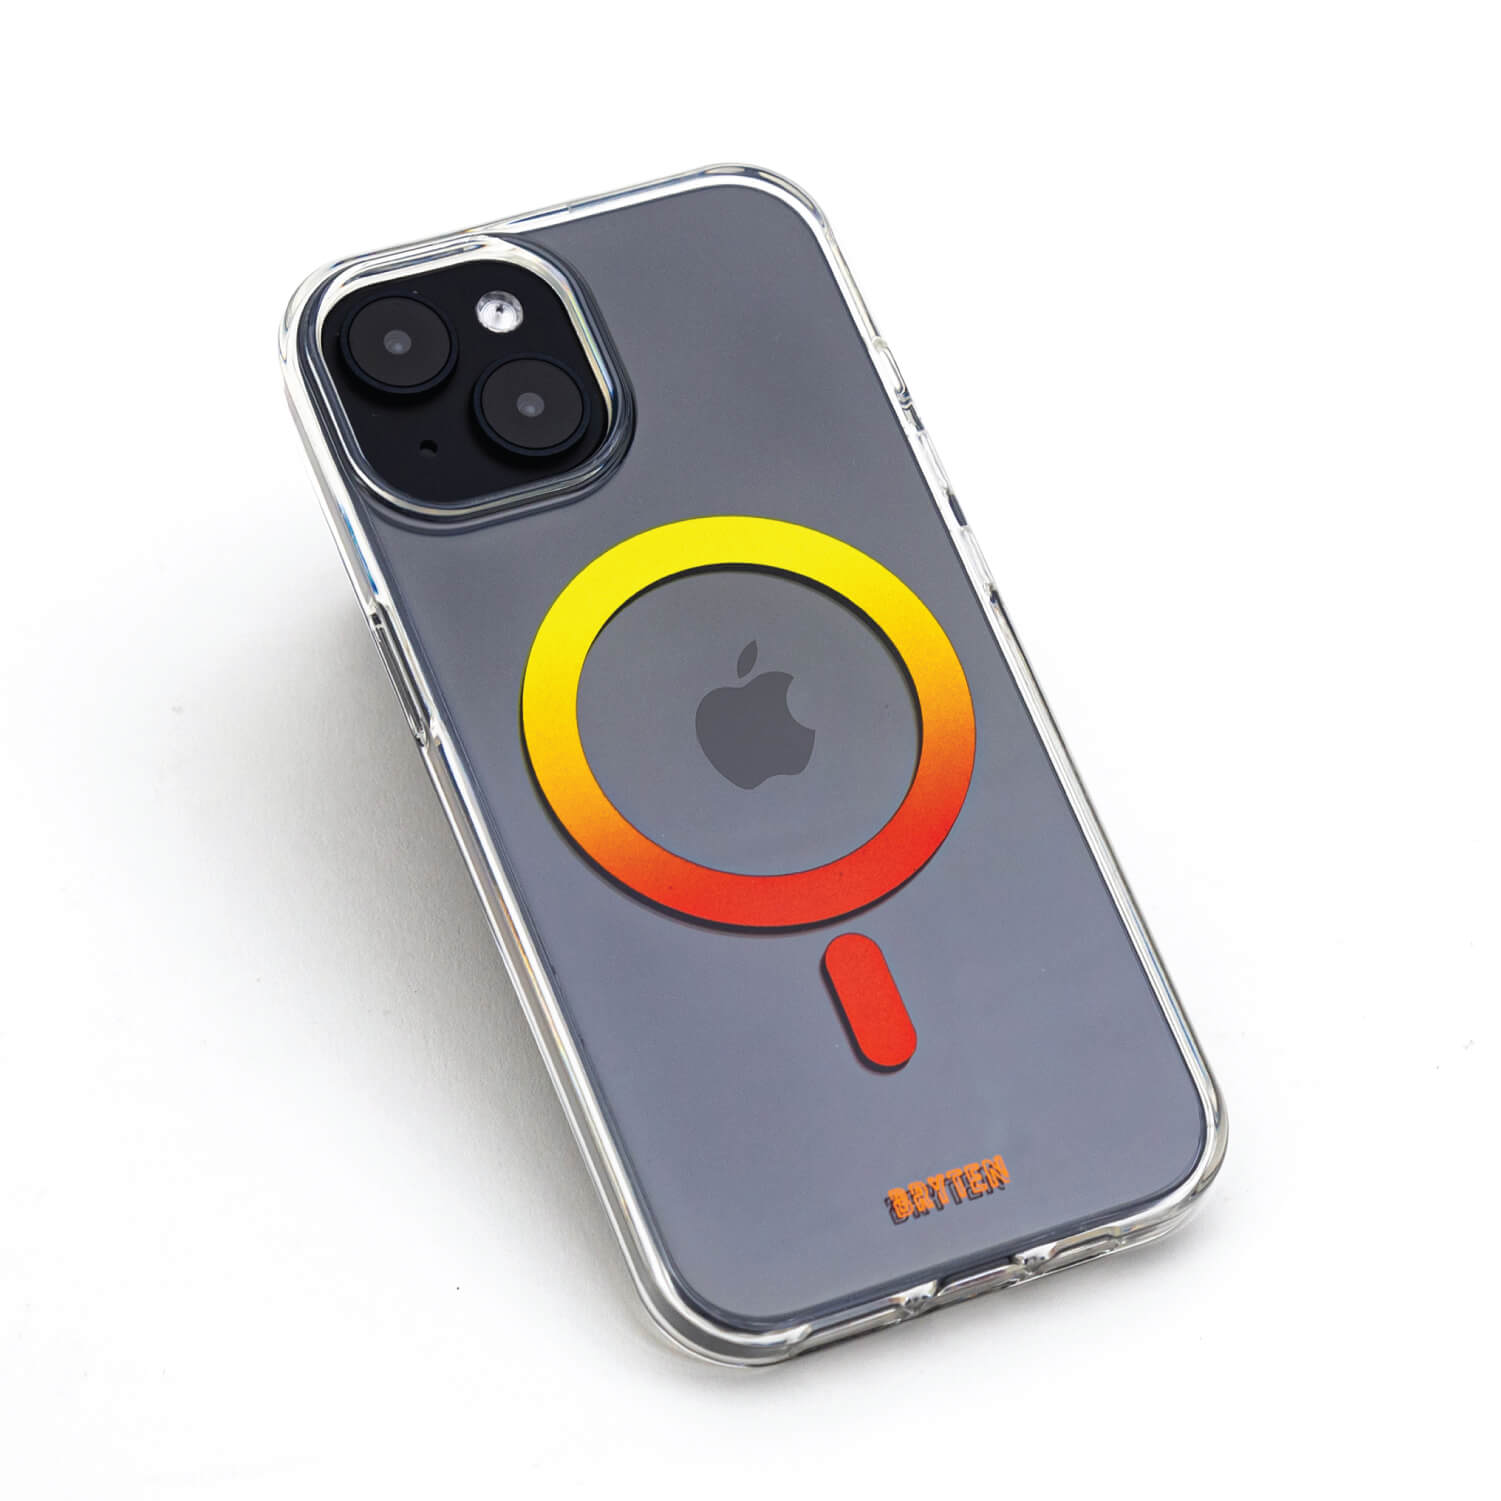 A clear iPhone 15 MagFx MagSafe case by Bryten, with a vibrant orange and yellow circle, perfect for wireless charging.